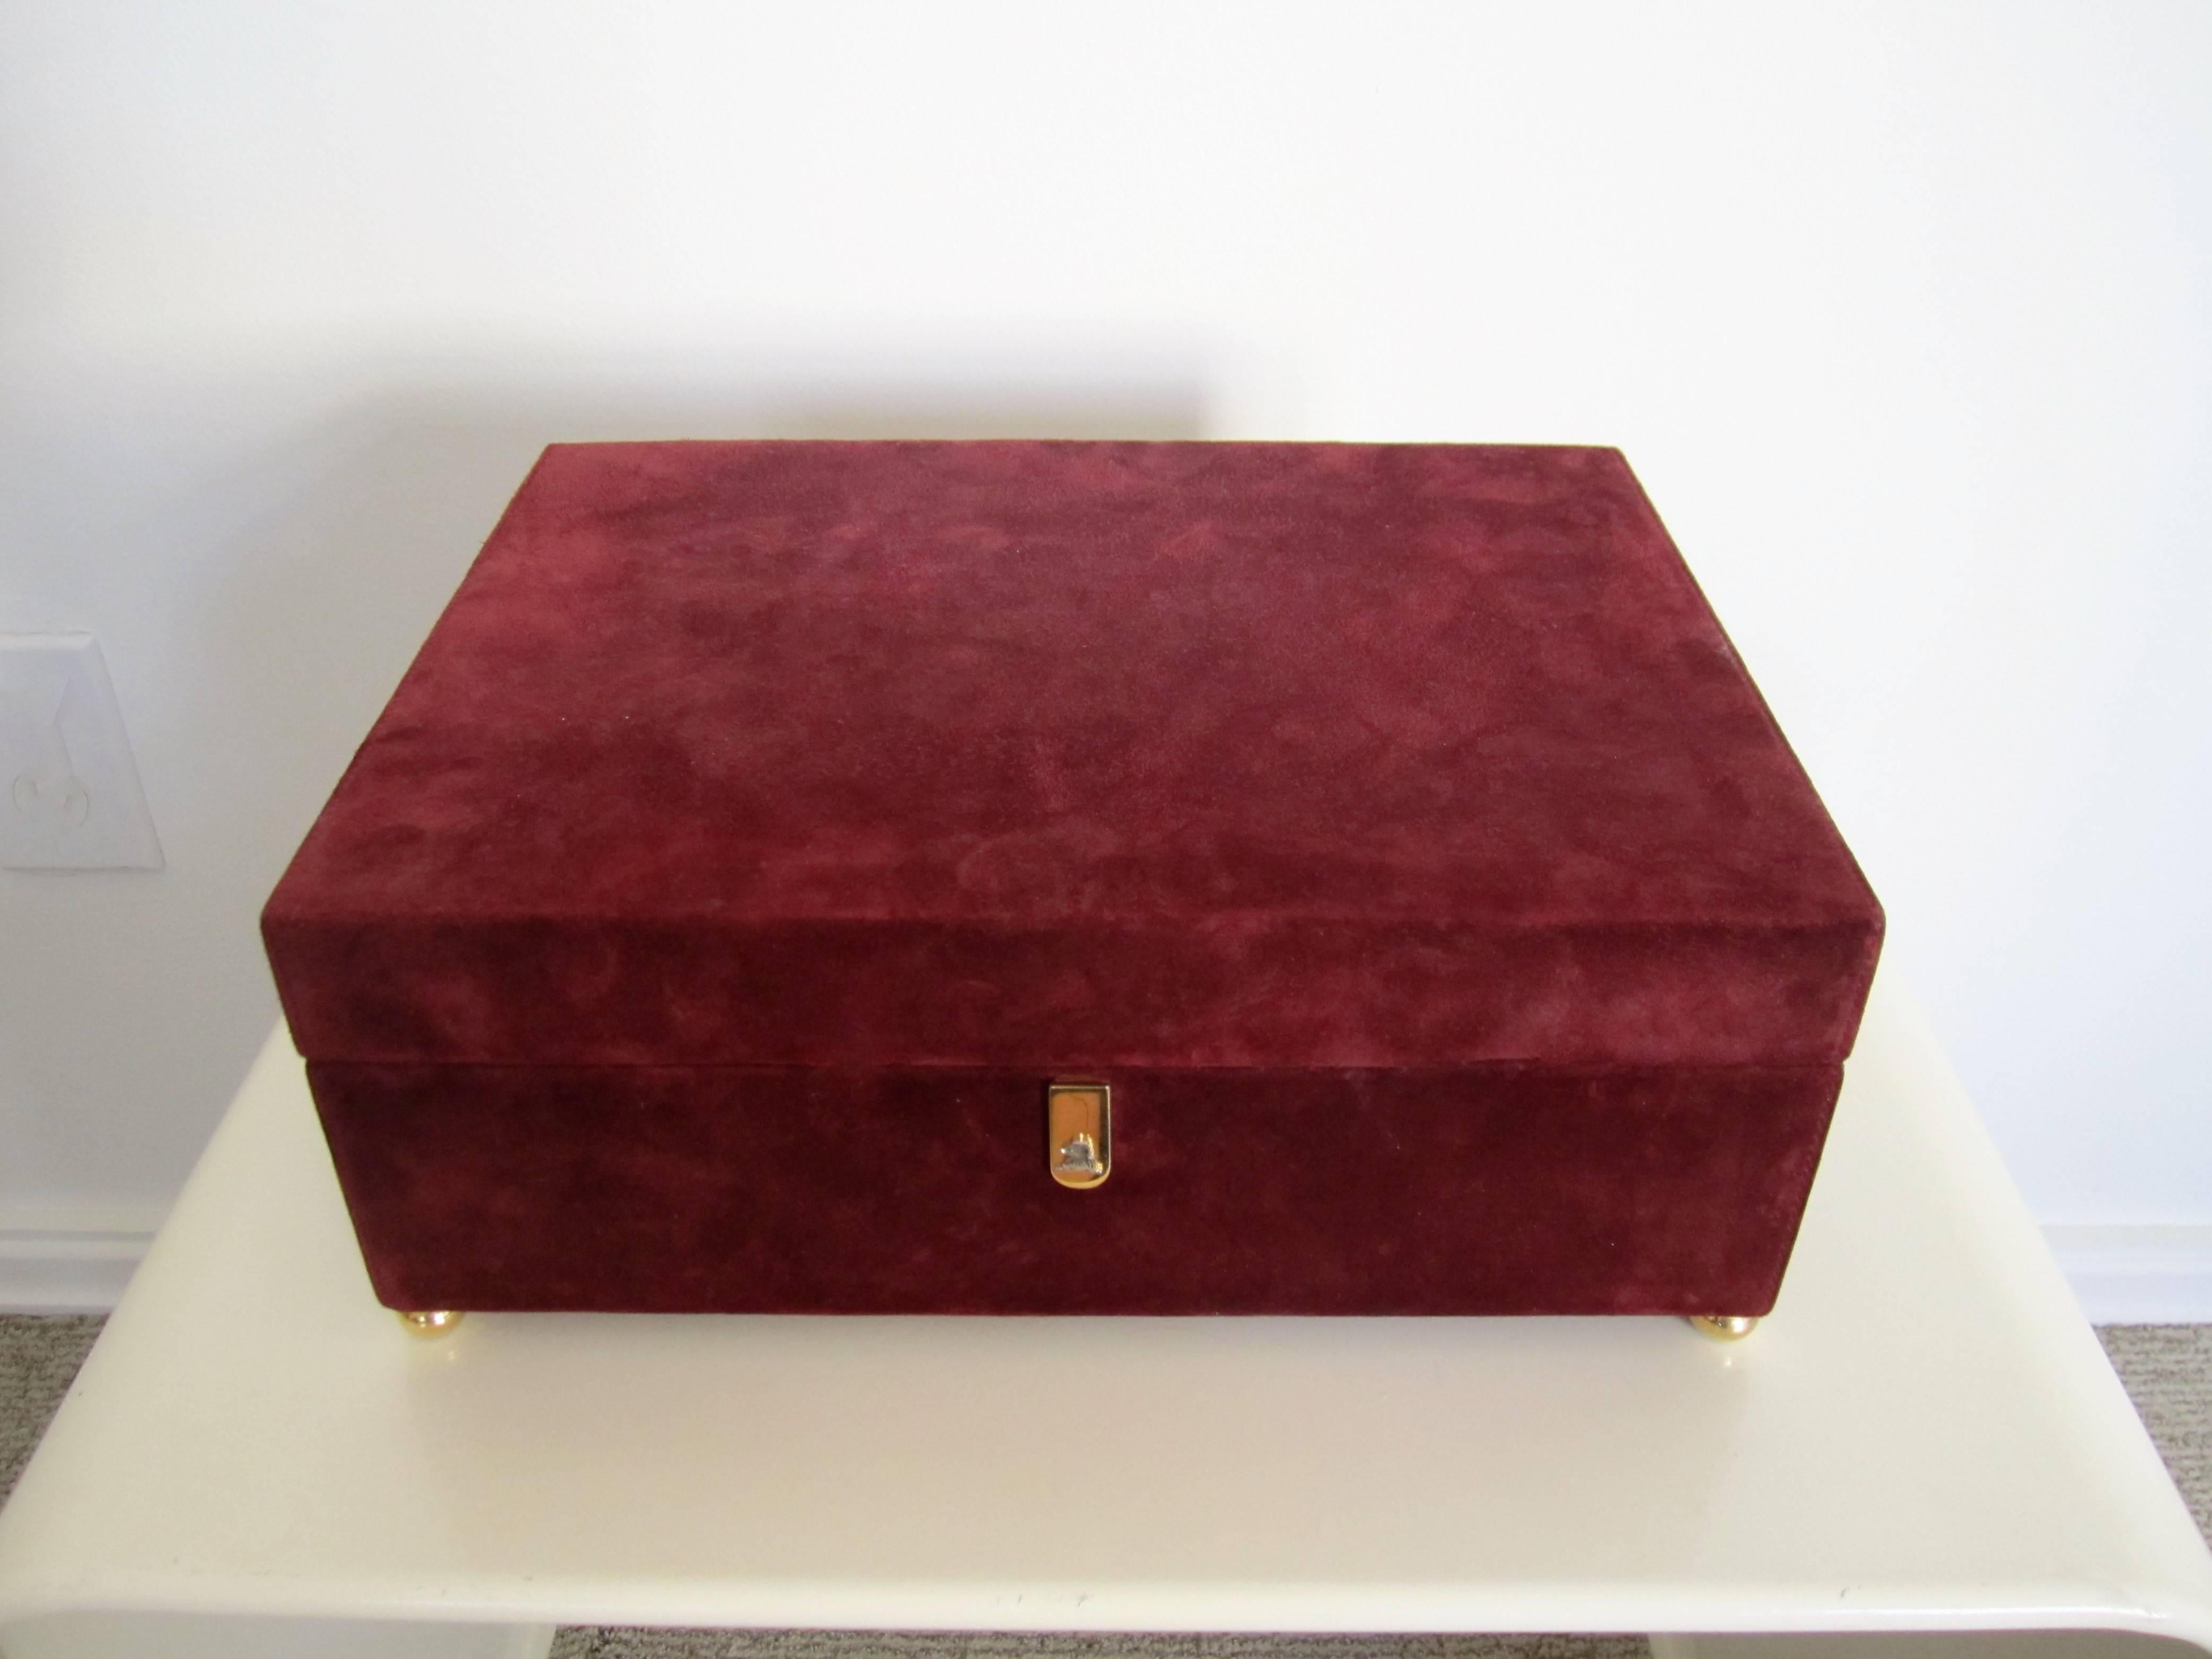 Made in Italy, a beautiful burgundy suede and leather hinged jewelry box with lock and key by designer Mark Cross. Box interior is a beige suede. Exterior is burgundy suede and leather. Tray is removable and allows for storage underneath. Maker's